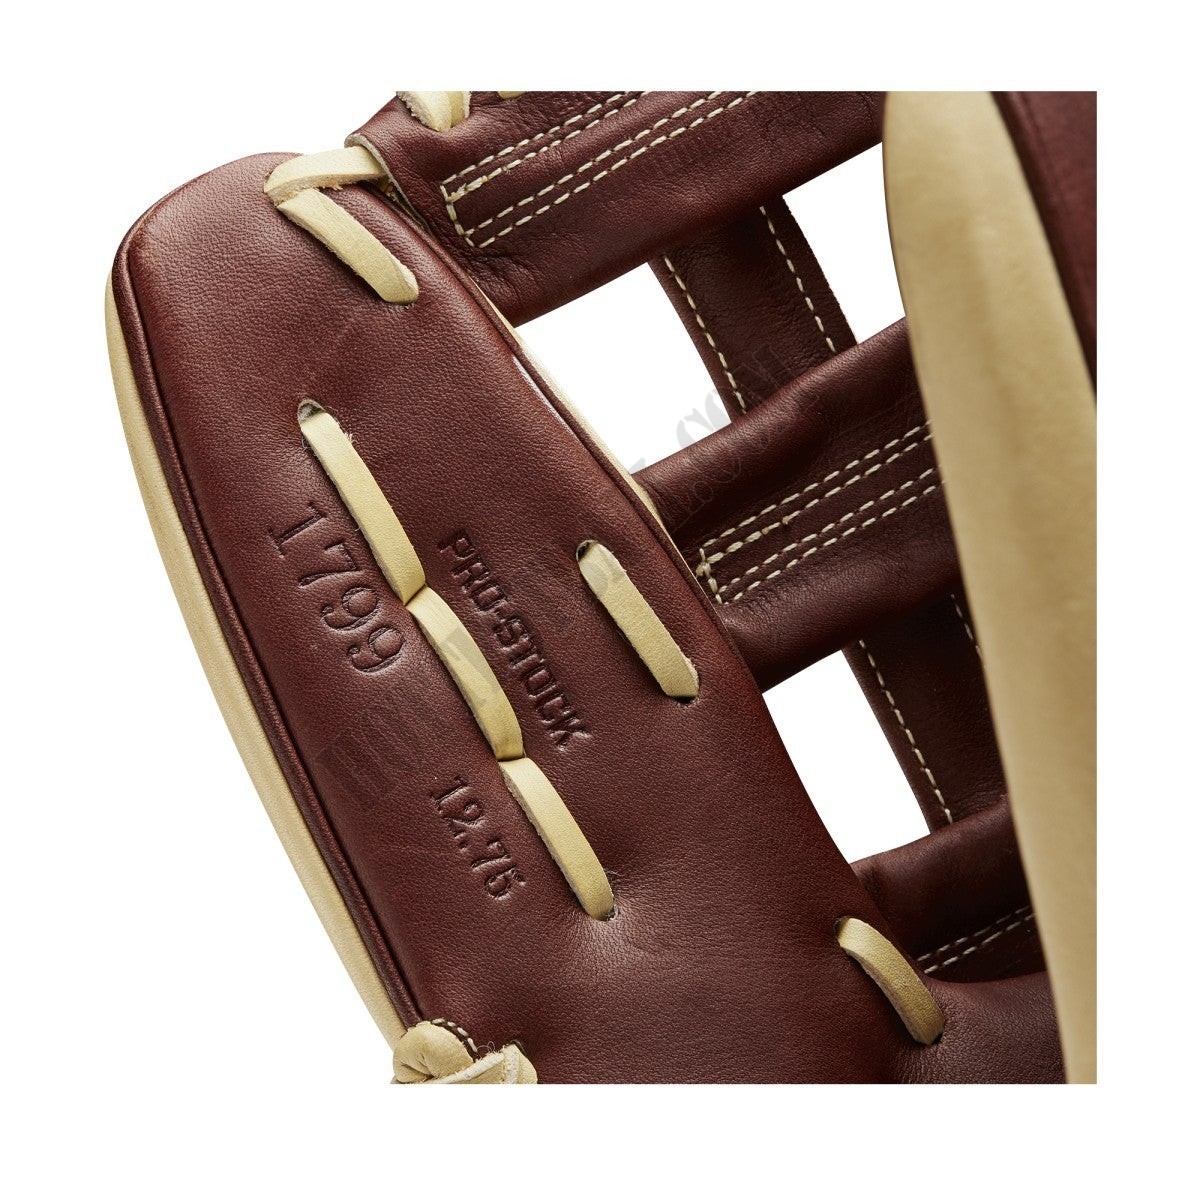 2021 A2000 1799 12.75" Outfield Baseball Glove ● Wilson Promotions - -7